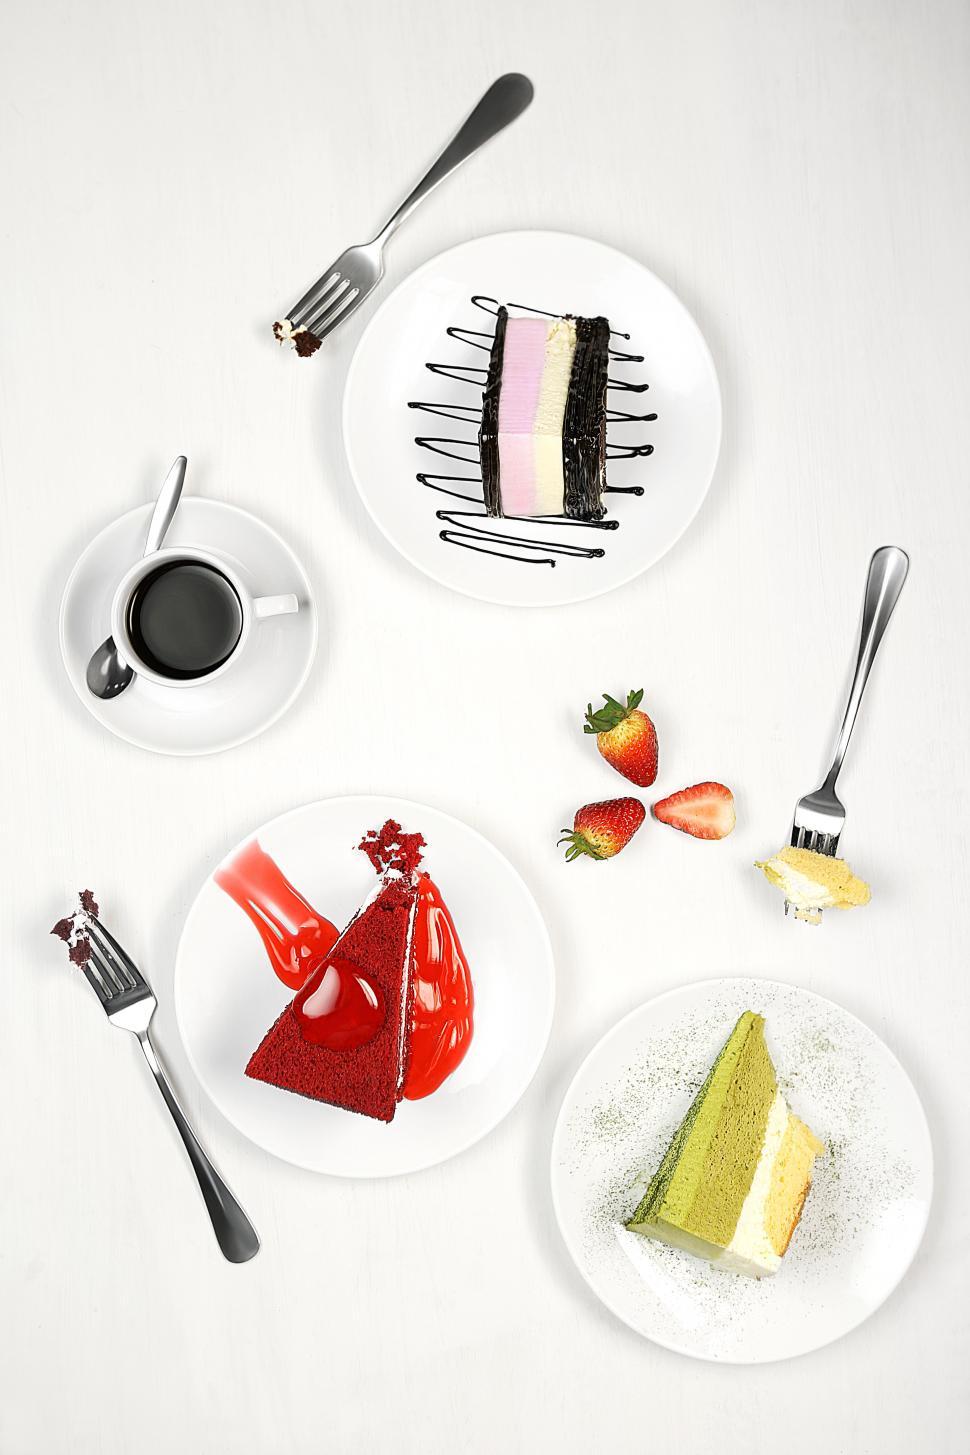 Free Image of Cake slices, forks,strawberries and coffee cup on white dish isolated on white background 